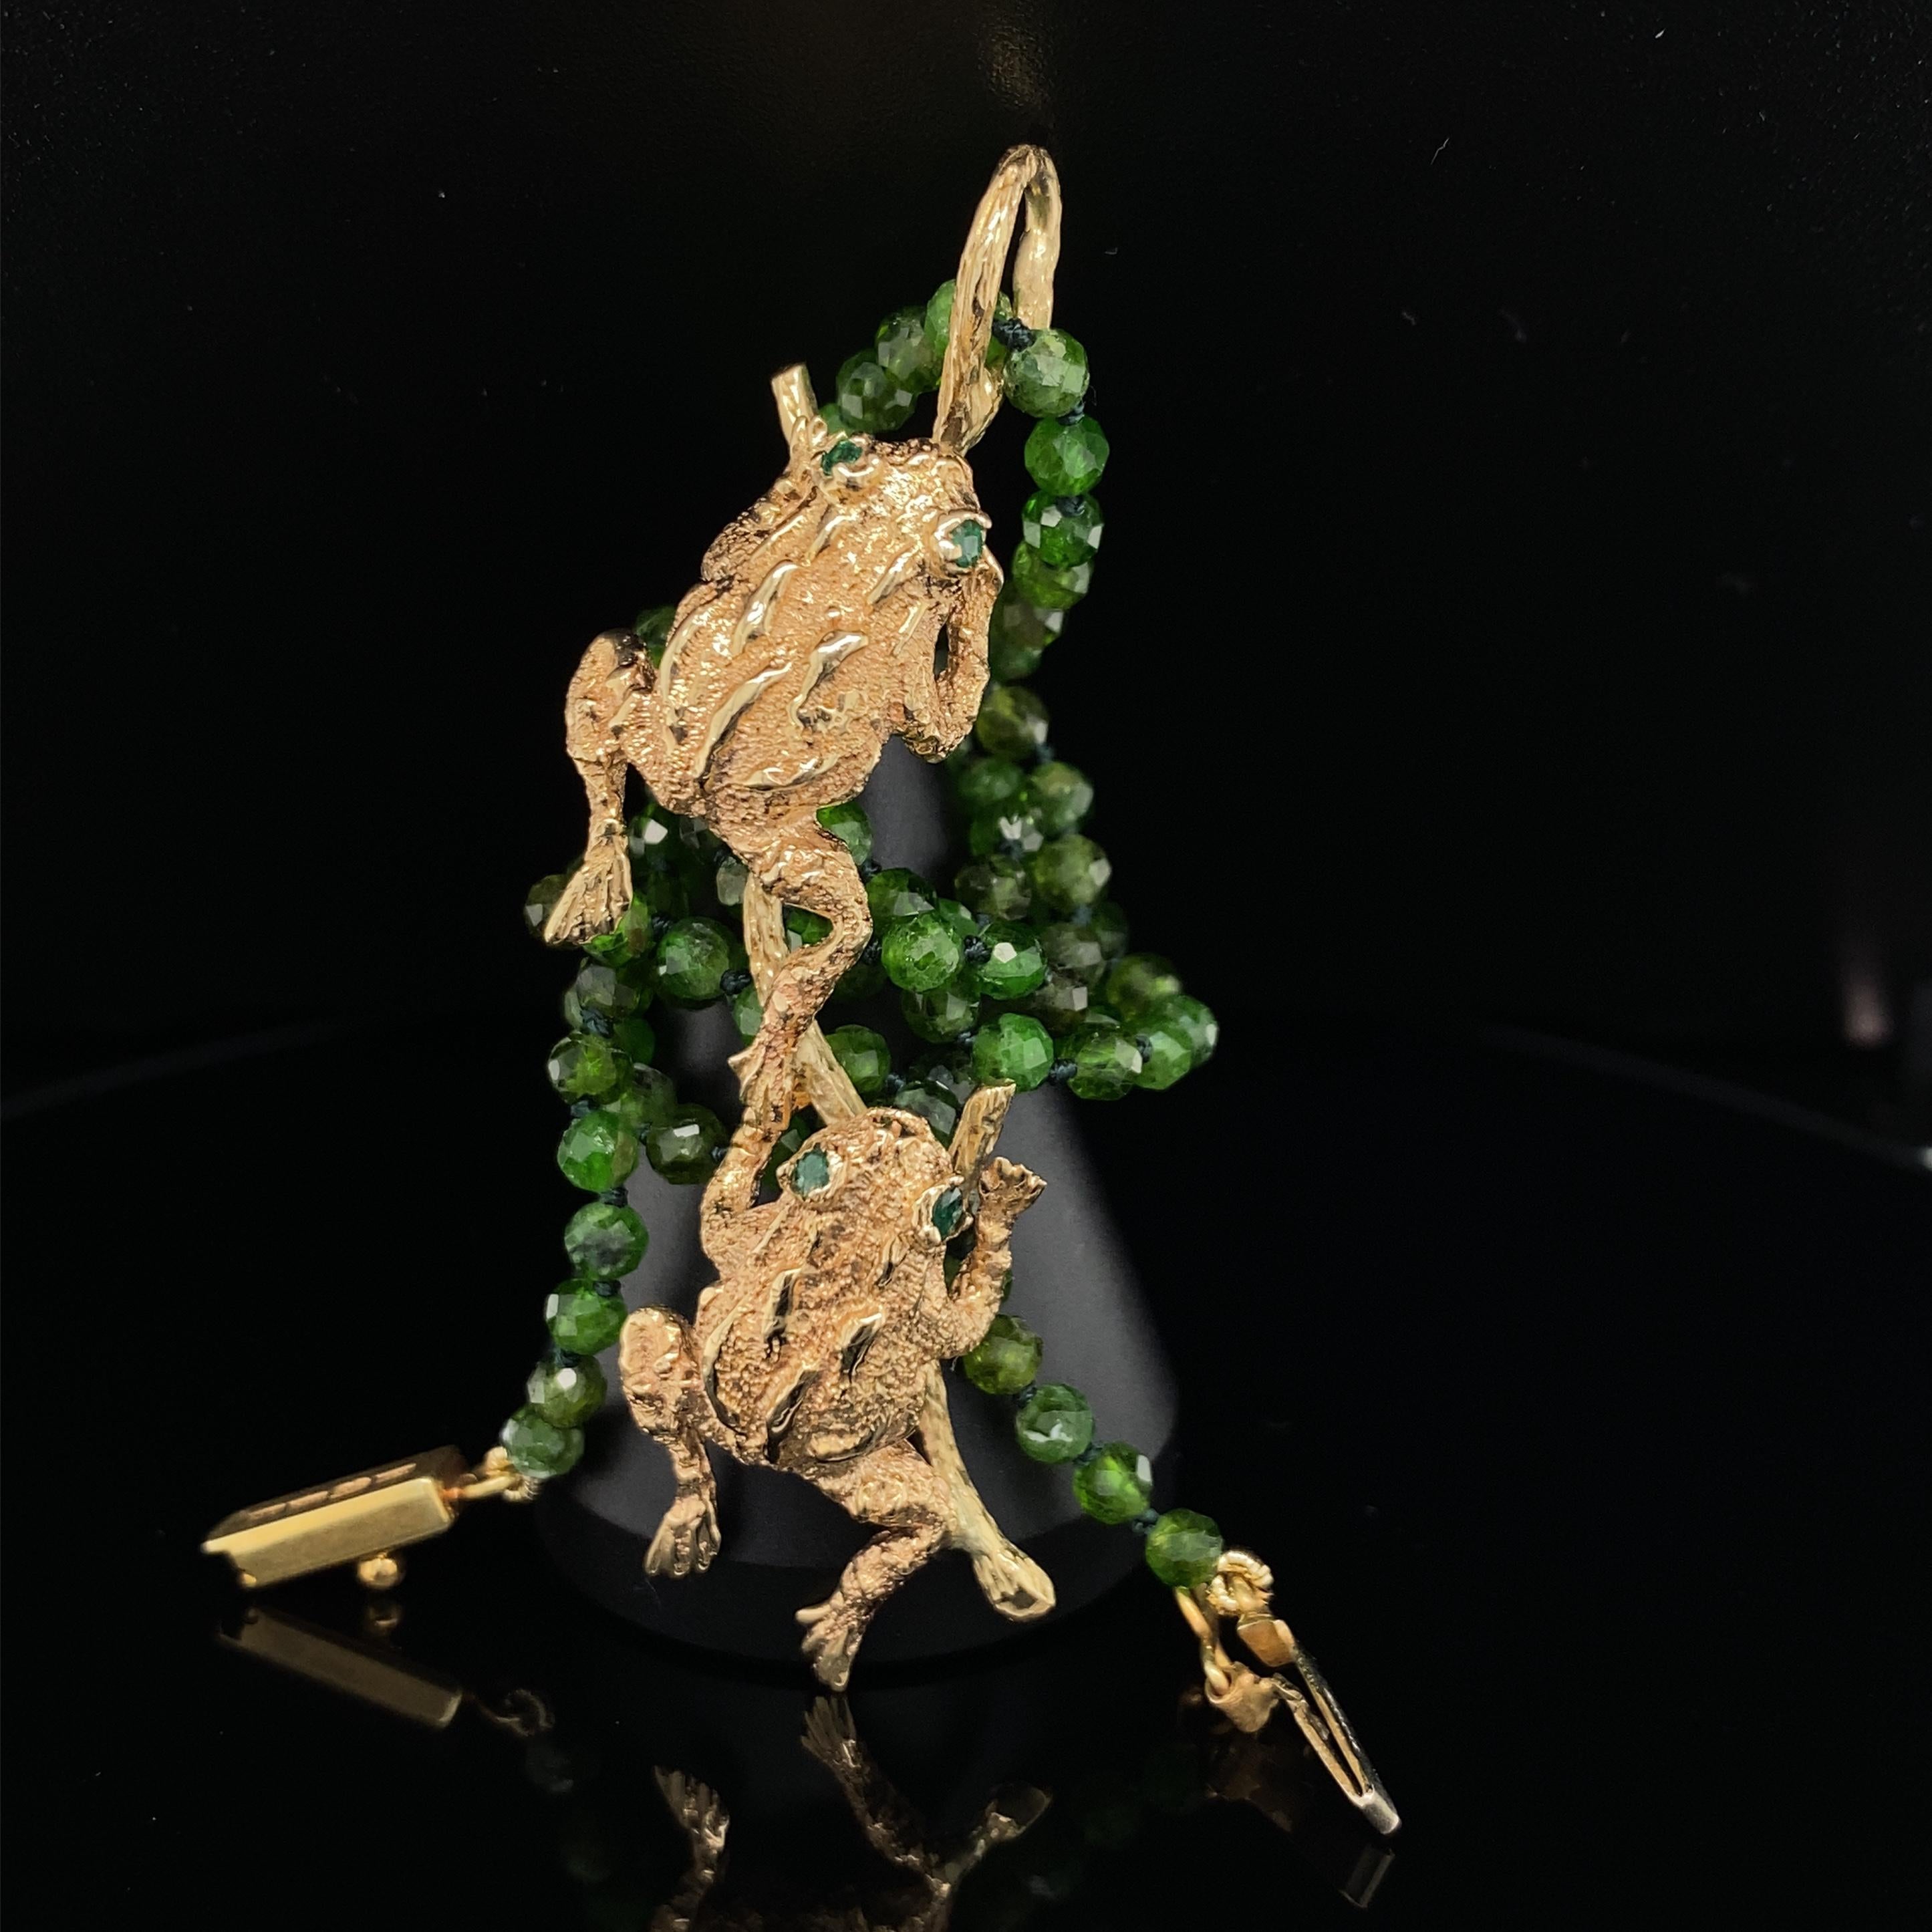 This determined pair of 14 karat gold frogs started out in life as pins.  We're not sure who made them (they have a maker's mark on their feet that we haven't been able to identify), but Eytan Brandes decided they'd be happier joined together as a